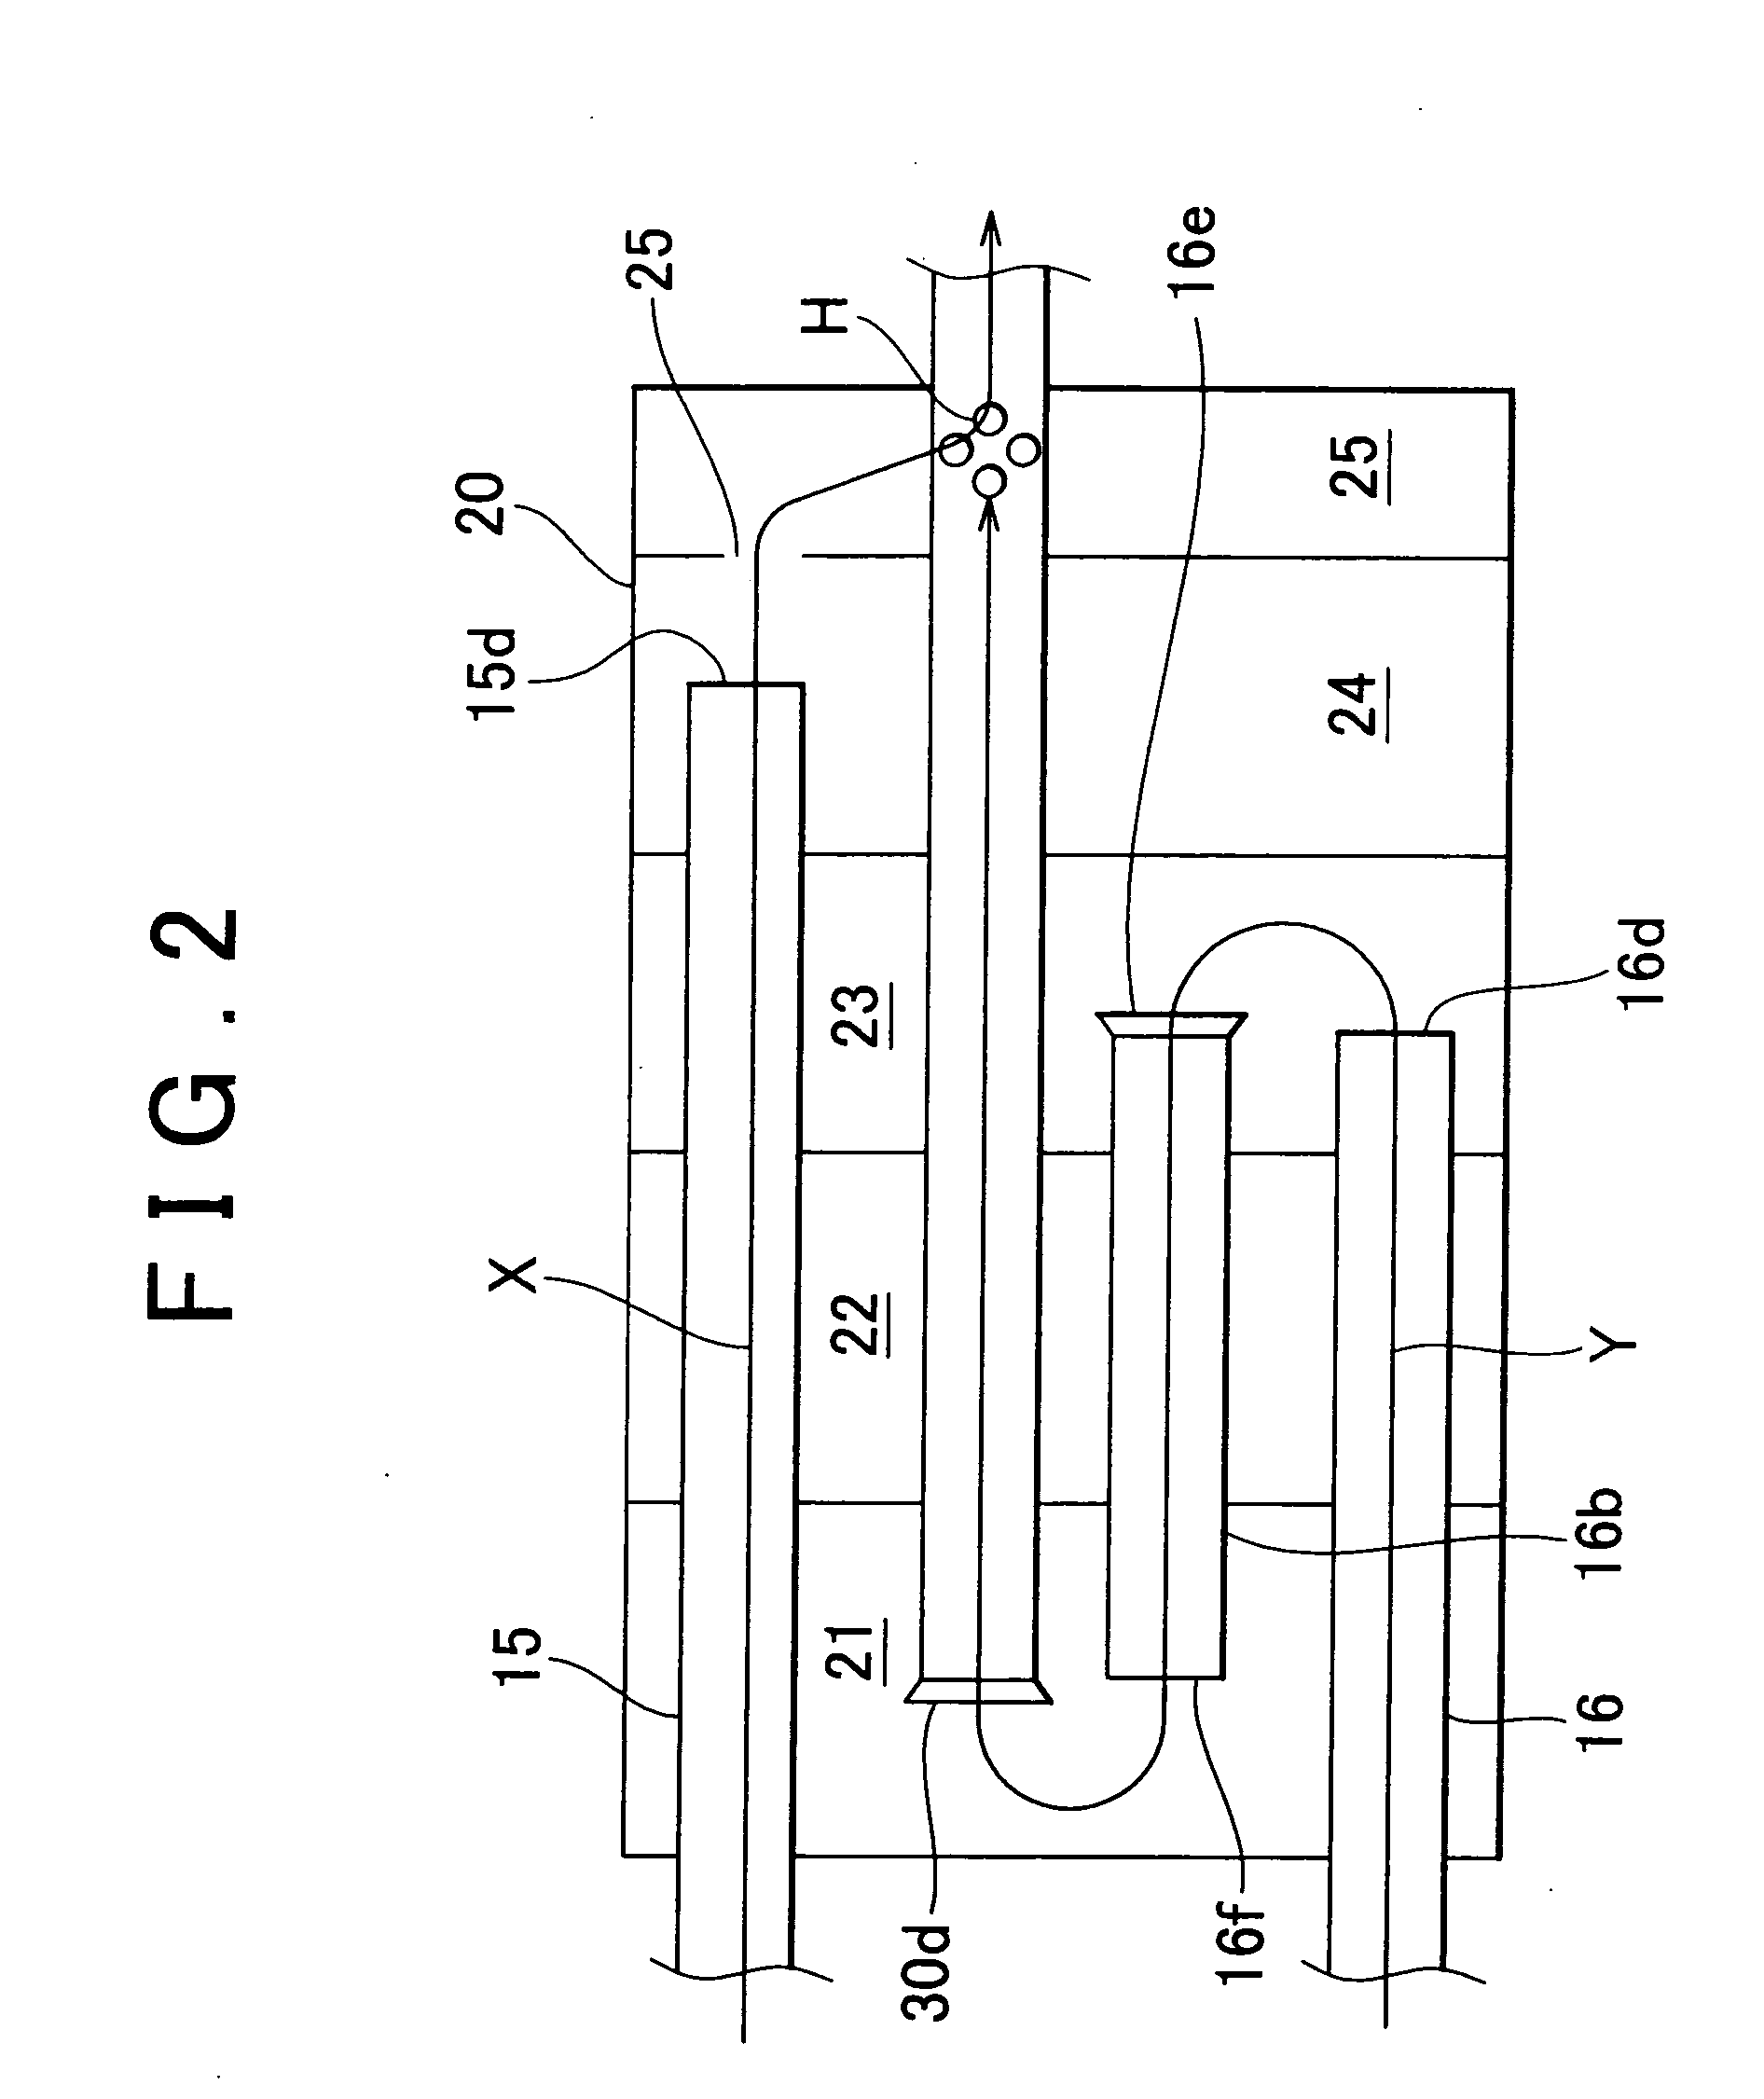 Exhaust system of internal combustion engine